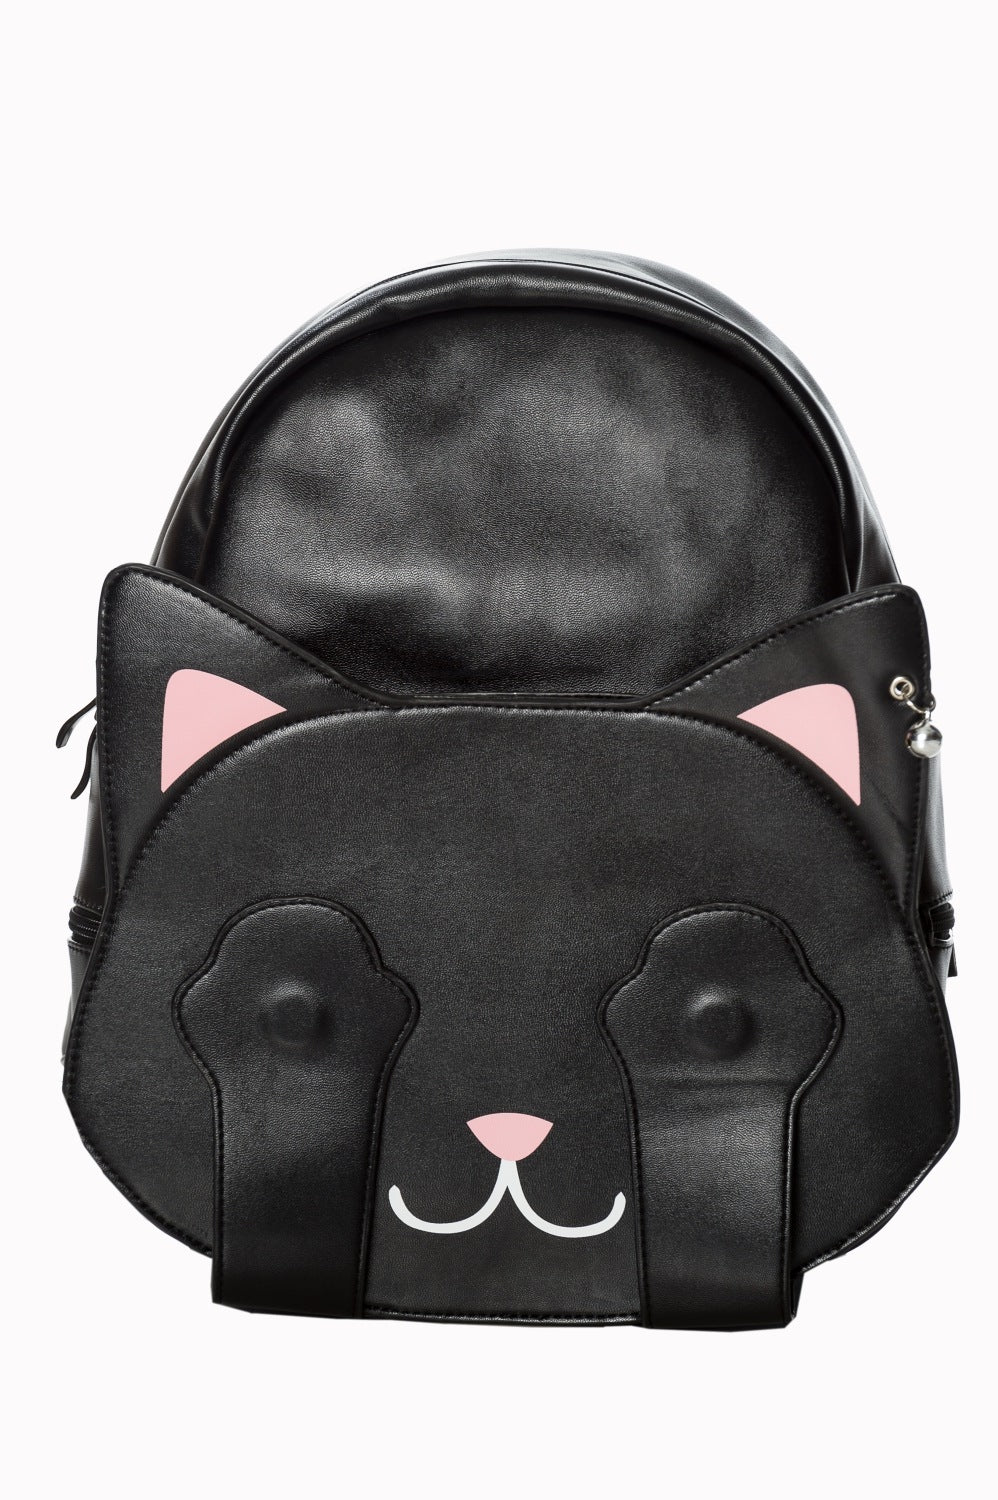 Cat back pack with paws hiding eyes via magnets 